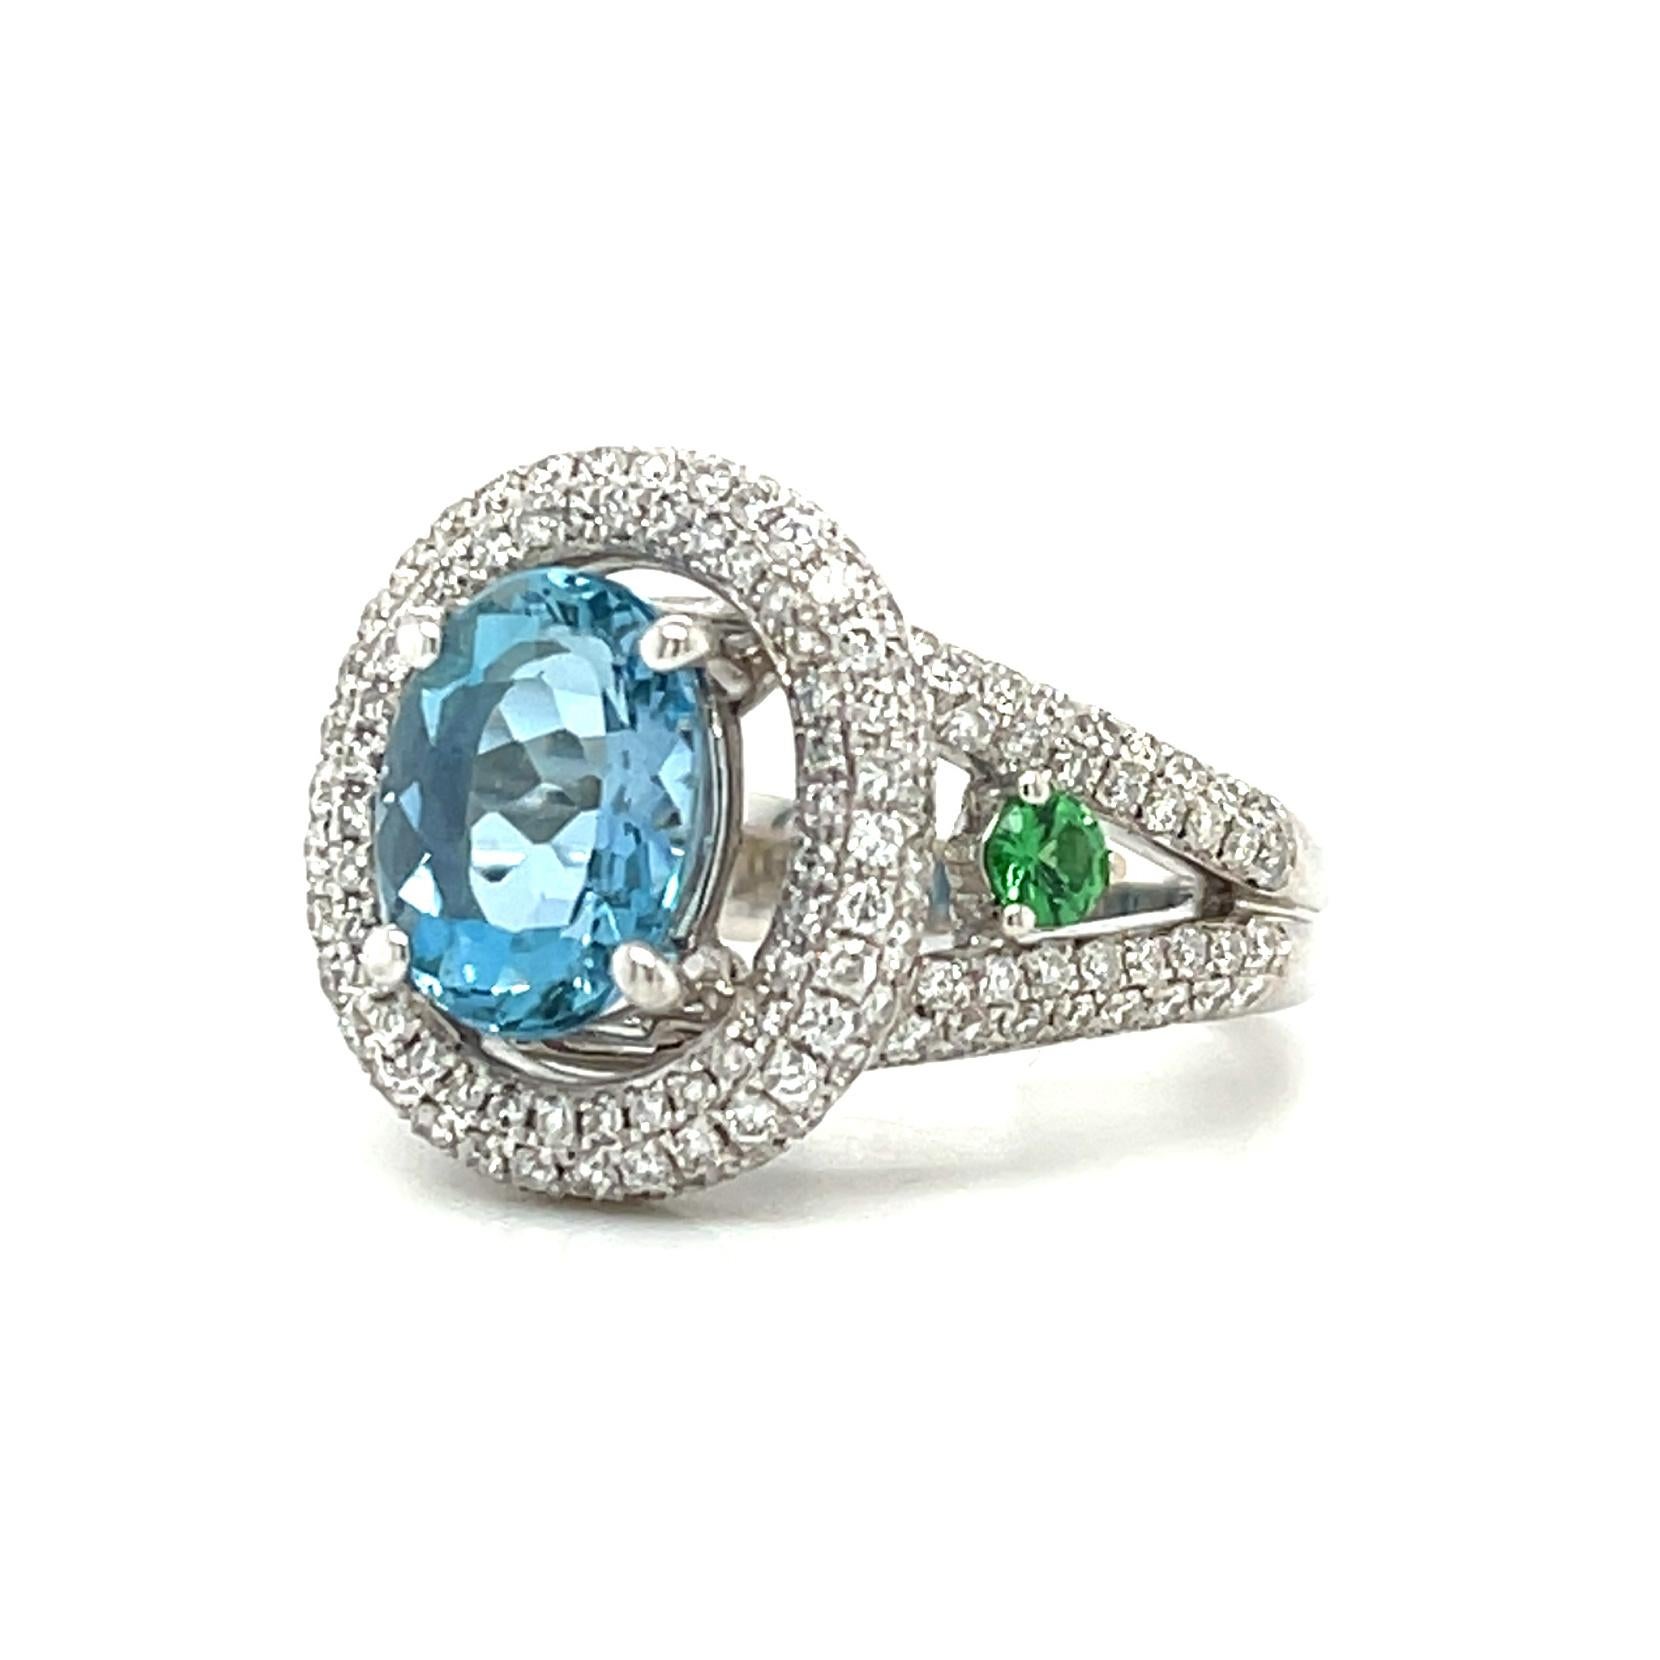 Oval Cut Aquamarine, Tsavorite Garnet and Diamond Halo Cocktail Ring in White Gold For Sale